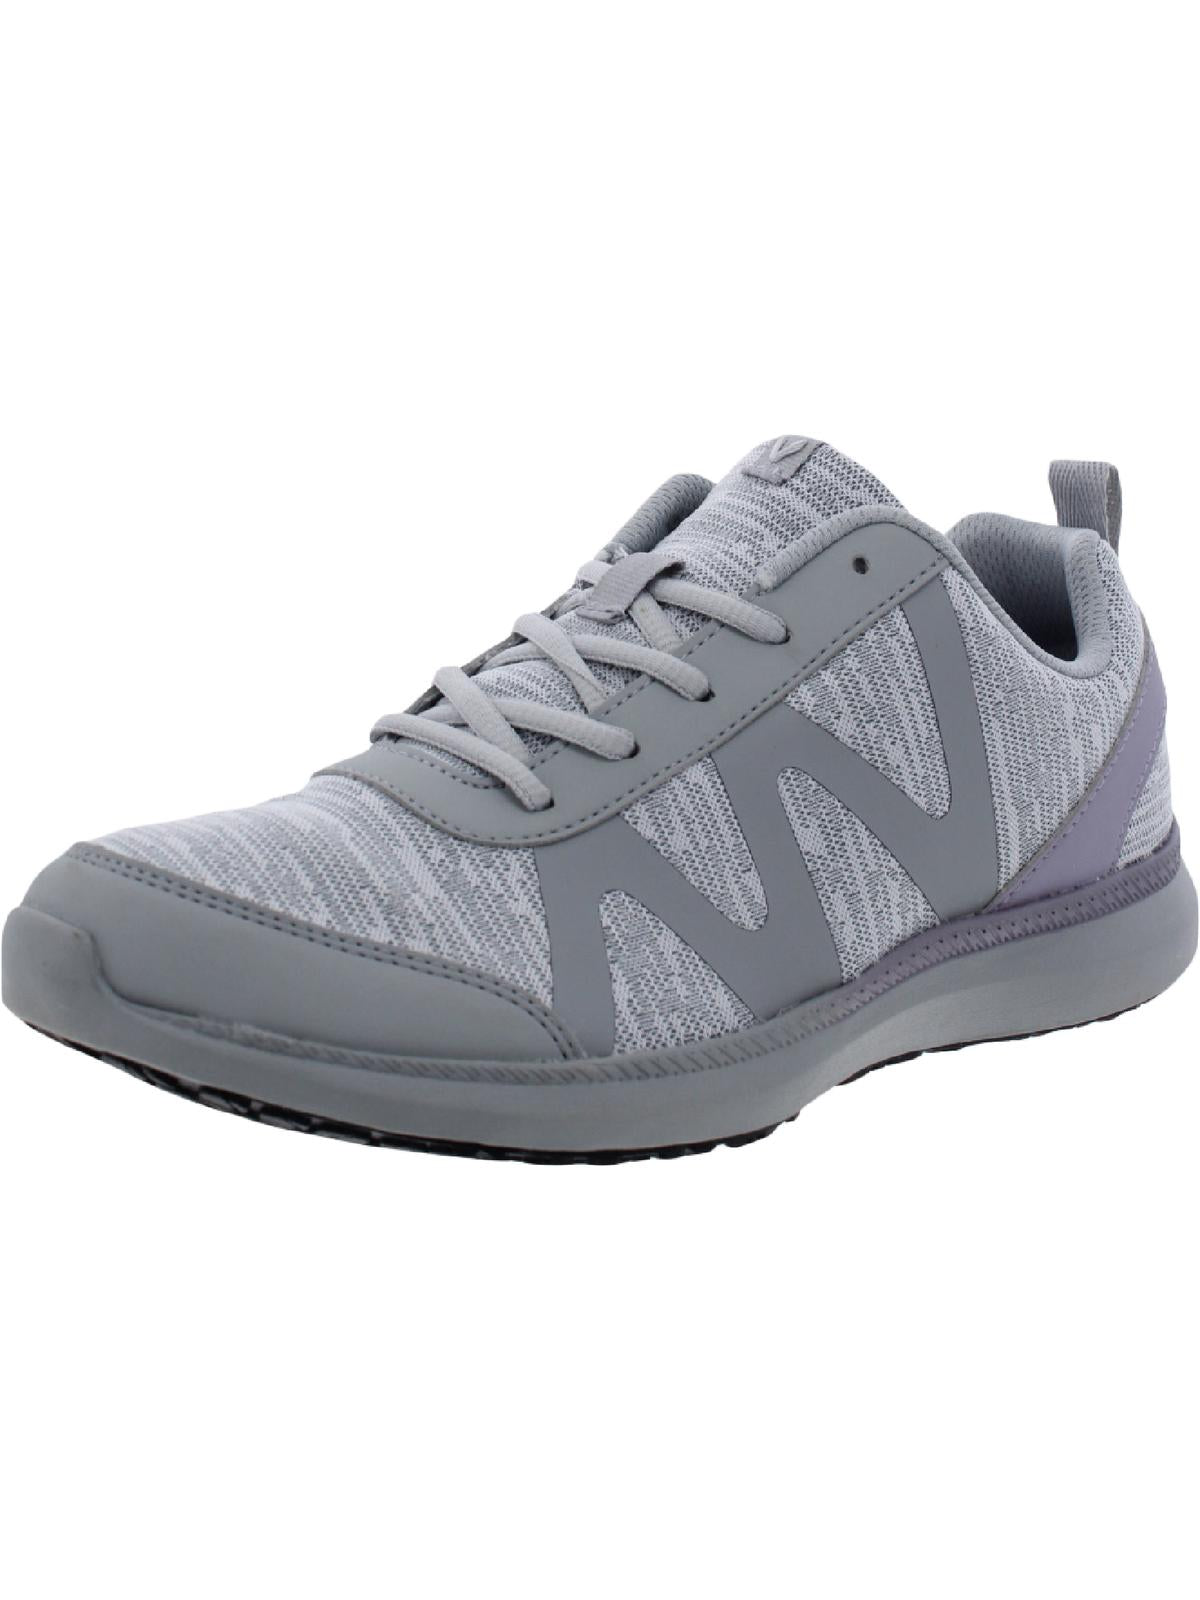 Shop Vionic Kiara Womens Mesh Lifestyle Athletic And Training Shoes In Grey